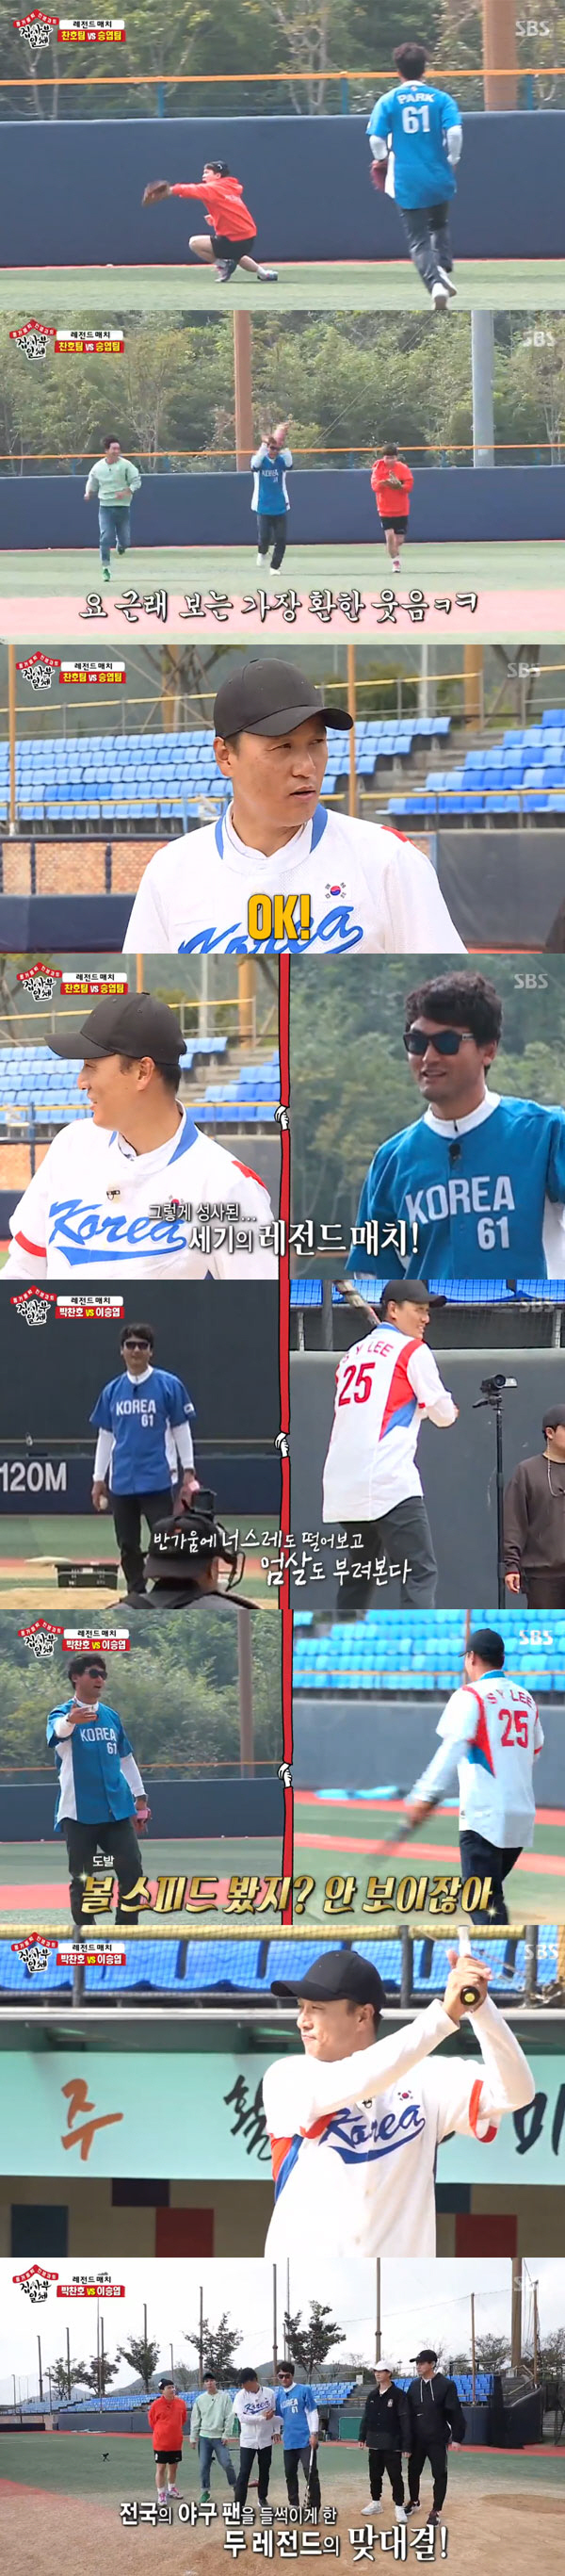 All The Butlers Chan Ho Park and Lee Seung-yeops Legend Match were unfolded.SBS All The Butlers Lee Seung-gi and Lee Sang-yoon, Yook Sungjae and Yang Se-hyeong, who were broadcast on the 27th, spent Haru in Princess Chan Ho Parks roots.The rising figure was picked up by the training tool, Kumho Tire, and headed somewhere, where the boy Chanho lived, an alley, a staircase, and a rabbit training course.Chan Ho Park said, I dragged Kumho Tire from the slope to the hill and made 10 round trips every night. I have never walked up to my house.I went on a duck step because I was running out of time, she recalled.At that time, Chan Ho Park suggested, I will give you a handwritten sign ball if you do not get up and finish among Lee Sang-yoon and Yook Sungjae, two rabbits. Lee Sang-yoon and Yook Sungjae burned their motivation.The Masters house is now a memorial hall, and the space where memories of the young mans chants were built has become a place to remember legends.In 1991, Chan Ho Park said, Exercise, which is peeled every day, is demonstration, but I think it is the right way to overcome it.I will do it no matter what difficulties I have for my goal, my future. He wrote, Please help me God. The boys desperate prayer became the beginning of history and the hope of the desperate people.Chan Ho Park said: There is a passion when there is patience; the fruits of patience and effort are one more than I did and that makes me feel more confident.Then I headed to the hostel. Then Chan Ho Park tried to talk to someone, saying, I came to the princess and talked to someone.He was none other than a Pak Se-ri player.Lee Seung-gi said, When I came to see the princess and met someone, I came up with Chan Ho Park and Pak Se-ri. I wanted to meet Pak Se-ri personally.So Pak Se-ri shivered, Im very expensive, will you be okay?Pak Se-ri said: You made it to United States of America before me; its not easy for an Exercise player to play abroad in Korea at the time.I did not see each others faces in a lonely foreign life, but I was comforted by the news. After the call, Chan Ho Park said, I talked less today, and I want to talk again while sleeping with Haru routine.To set up a member to sleep with Master Chan Ho Park, he performed a game called Baseball Sewing.Lee Seung-gi, usually called passion victory, strongly denied no as soon as Chan Ho Parks praise of good ended, making everyone laugh.Since then, Chan Ho Park has decided to Lee Sang-yoon as a sleeping person, saying, Mr.The next morning, Master and the rising figure headed to Baseball: Princess Citys Chan Ho Park Baseball.At that time, a special guest appeared, Legend batter Lee Seung-yeop.Lee Seung-yeop said, Its been a long time since I appeared on the show. Its very awkward. However, I was not able to refuse as a junior because I was helped by Chan Ho.Lee Seung-yeop said, Chan Ho-hyung will take off his feet if his juniors are in trouble. I retired and cared more about my future than my family.Lee Seung-yeop also said, I was also invited to the United States of America this time, and I have been learning advanced baseball.I am so grateful to you, he added.Since then, he has been divided into Chan Ho Park team and Lee Seung-yeop team.The Chan Ho Park team was Lee Seung-gi and Yang Se-hyeong, and Lee Seung-yeop was Lee Sang-yoon and Yook Sungjae.Chan Ho Park and Lee Seung-yeop conducted one-on-one tweezers tutoring for the members; each team in the third round had a one-on-one match.The first-rounders were Yook Sungjae and Chan Ho Park; the result was a victory for Chan Ho Park.The runner-up was Lee Sang-yoon vs. Yang Se-chan.Lee Sang-yoon was swinging after checking the balls trajectory, but Yang Se-hyeong, who pinpointed the balls position, was the winner of Yang Se-hyeong by catching the ball.The last showdown was Lee Seung-yeop vs Lee Seung-gi.The last ball left Lee Seung-gis hand as the game ended when Lee Seung-gi grabbed another Strike.Lee Seung-yeops perfect hit, but Yang Se-hyeong took the ball and was the victory of Chan Ho Park team.Lee Seung-gi then proposed a confrontation between Chan Ho Park and Lee Seung-yeop, which Lee Seung-yeop accepted. Legend Match was concluded.The second was a right fast ball; now, if you have one Strike, Chan Ho Parks victory.The fourth ball left Chan Ho Parks hand, and the ball was a hit that rolled to the front of the fence.Lee Seung-yeop said, It was good to have a uniform with Chan-ho for a long time. Sports can spread good energy to many people.I hope you will watch not only Baseball but also many sports with interest. 